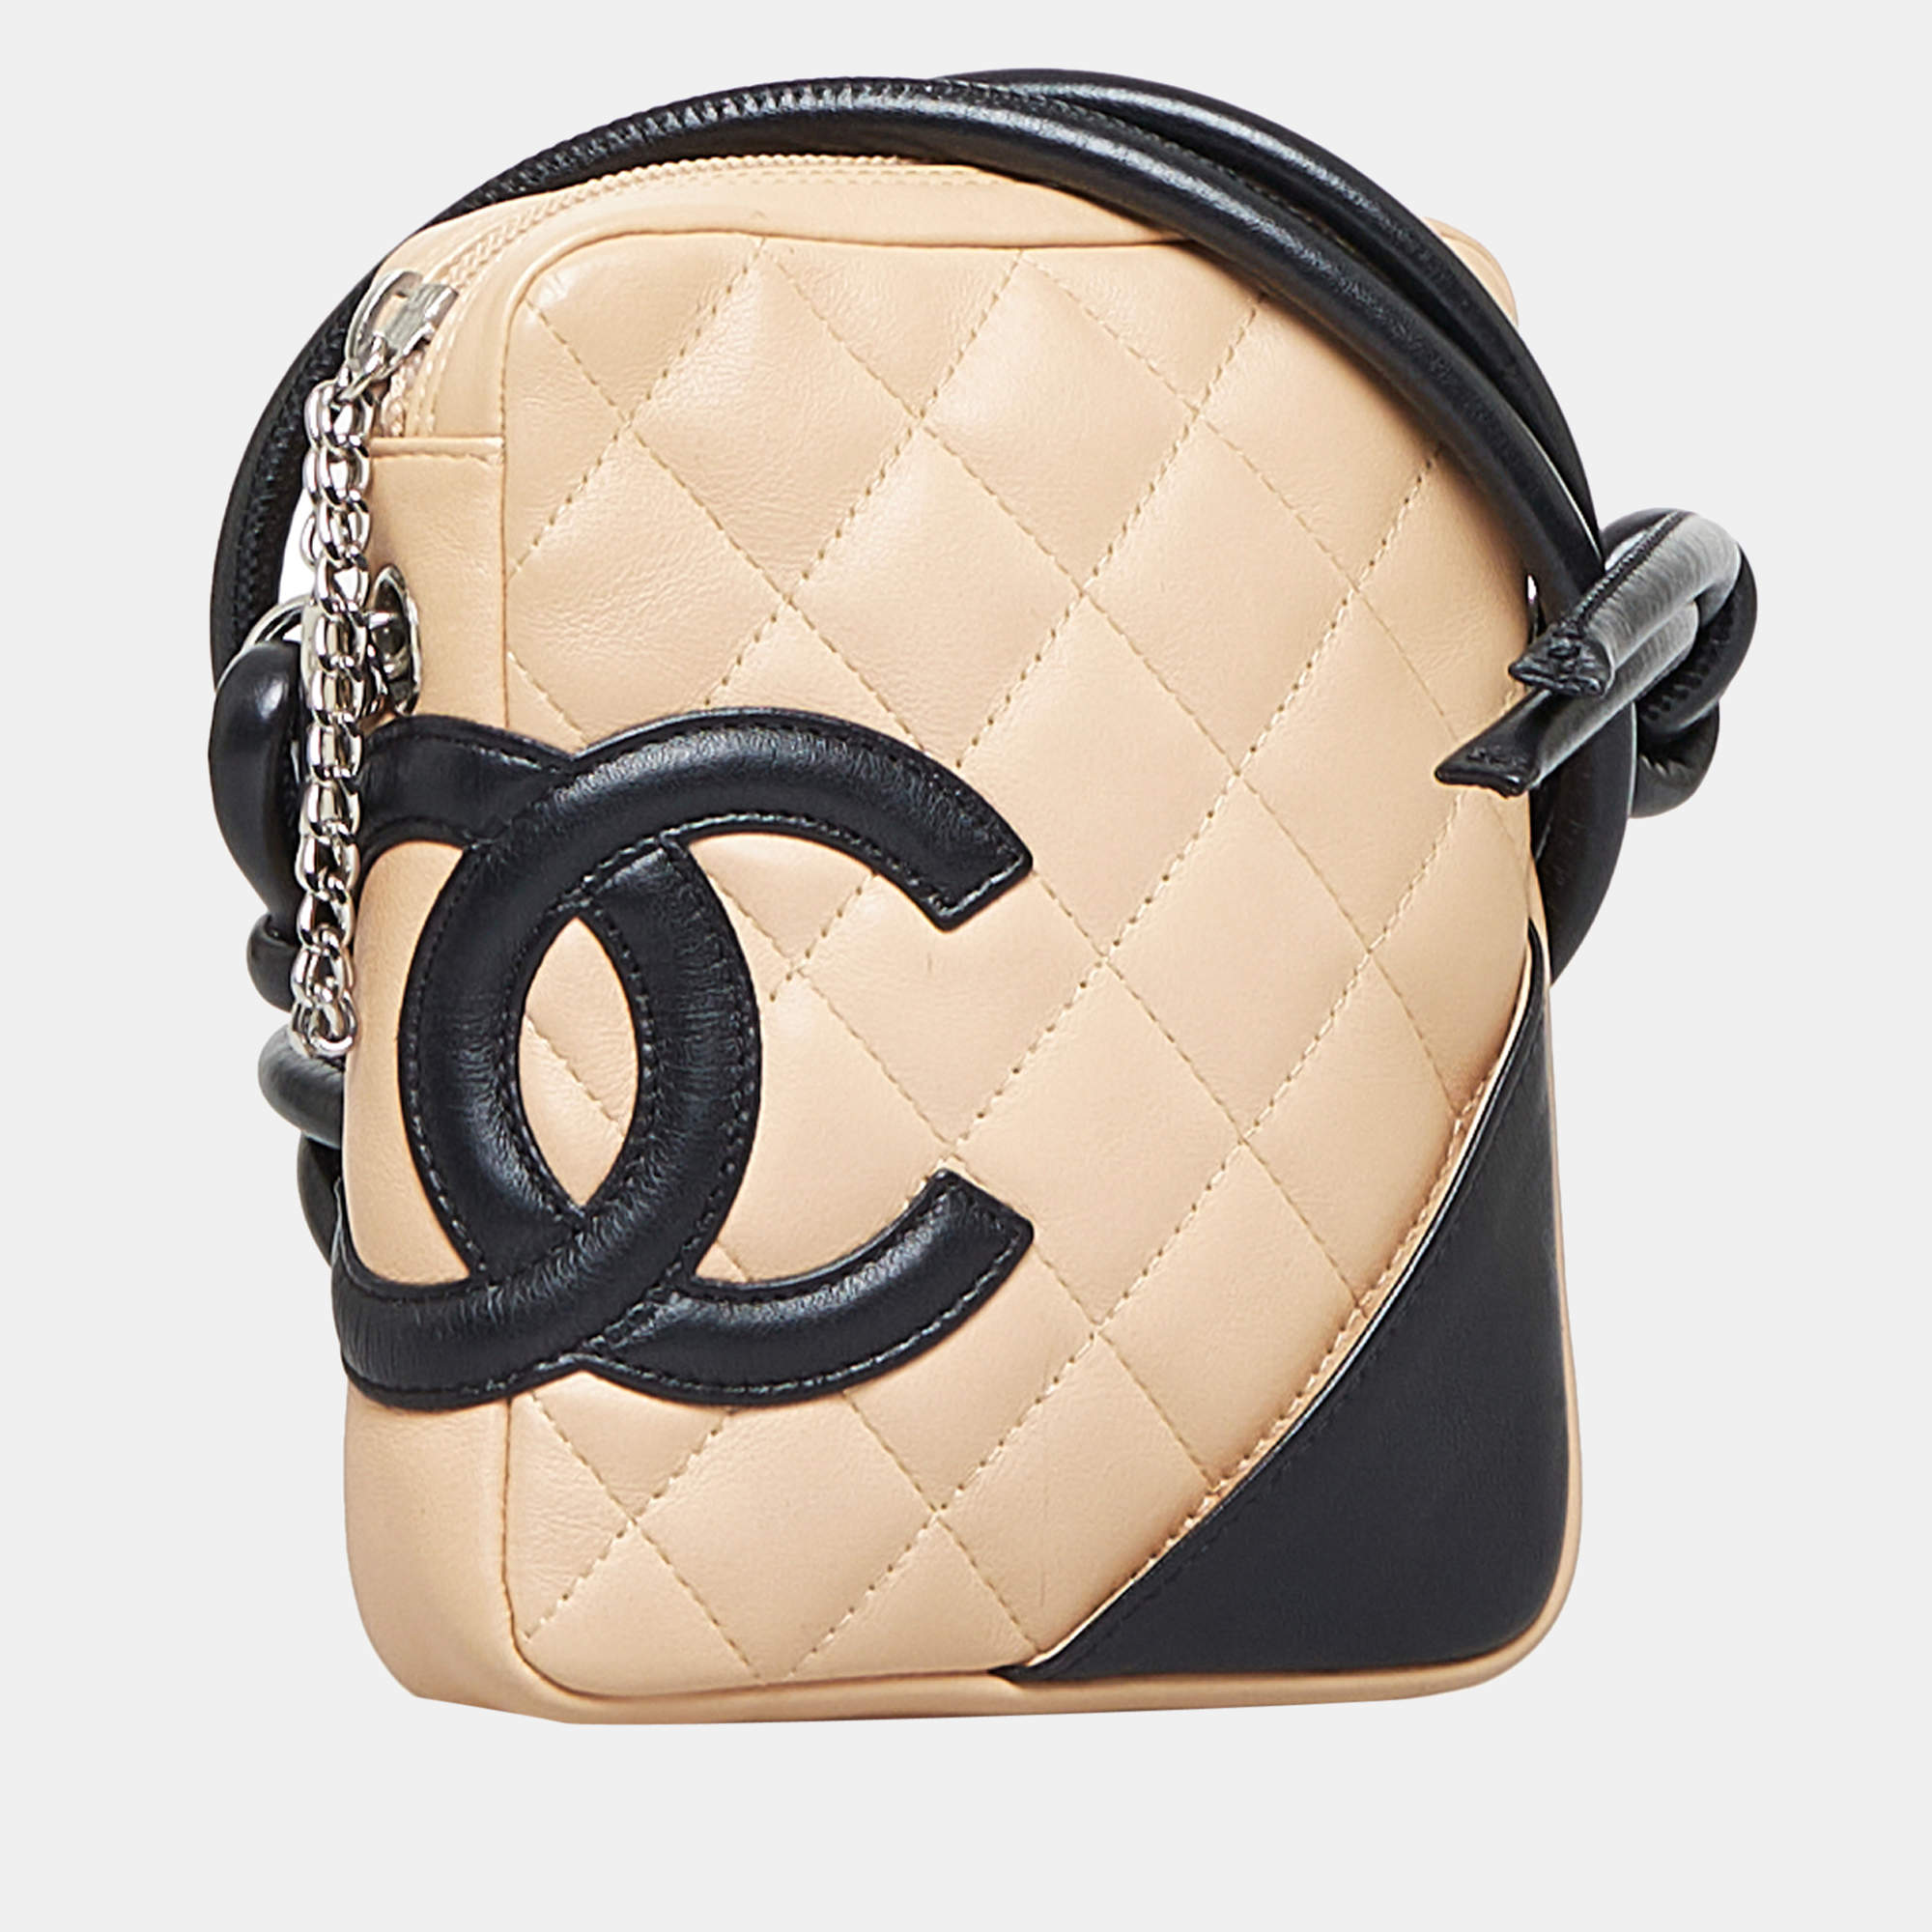 Chanel Small Flap with Chain/Leather Strap - CHANEL/CAMBON detail